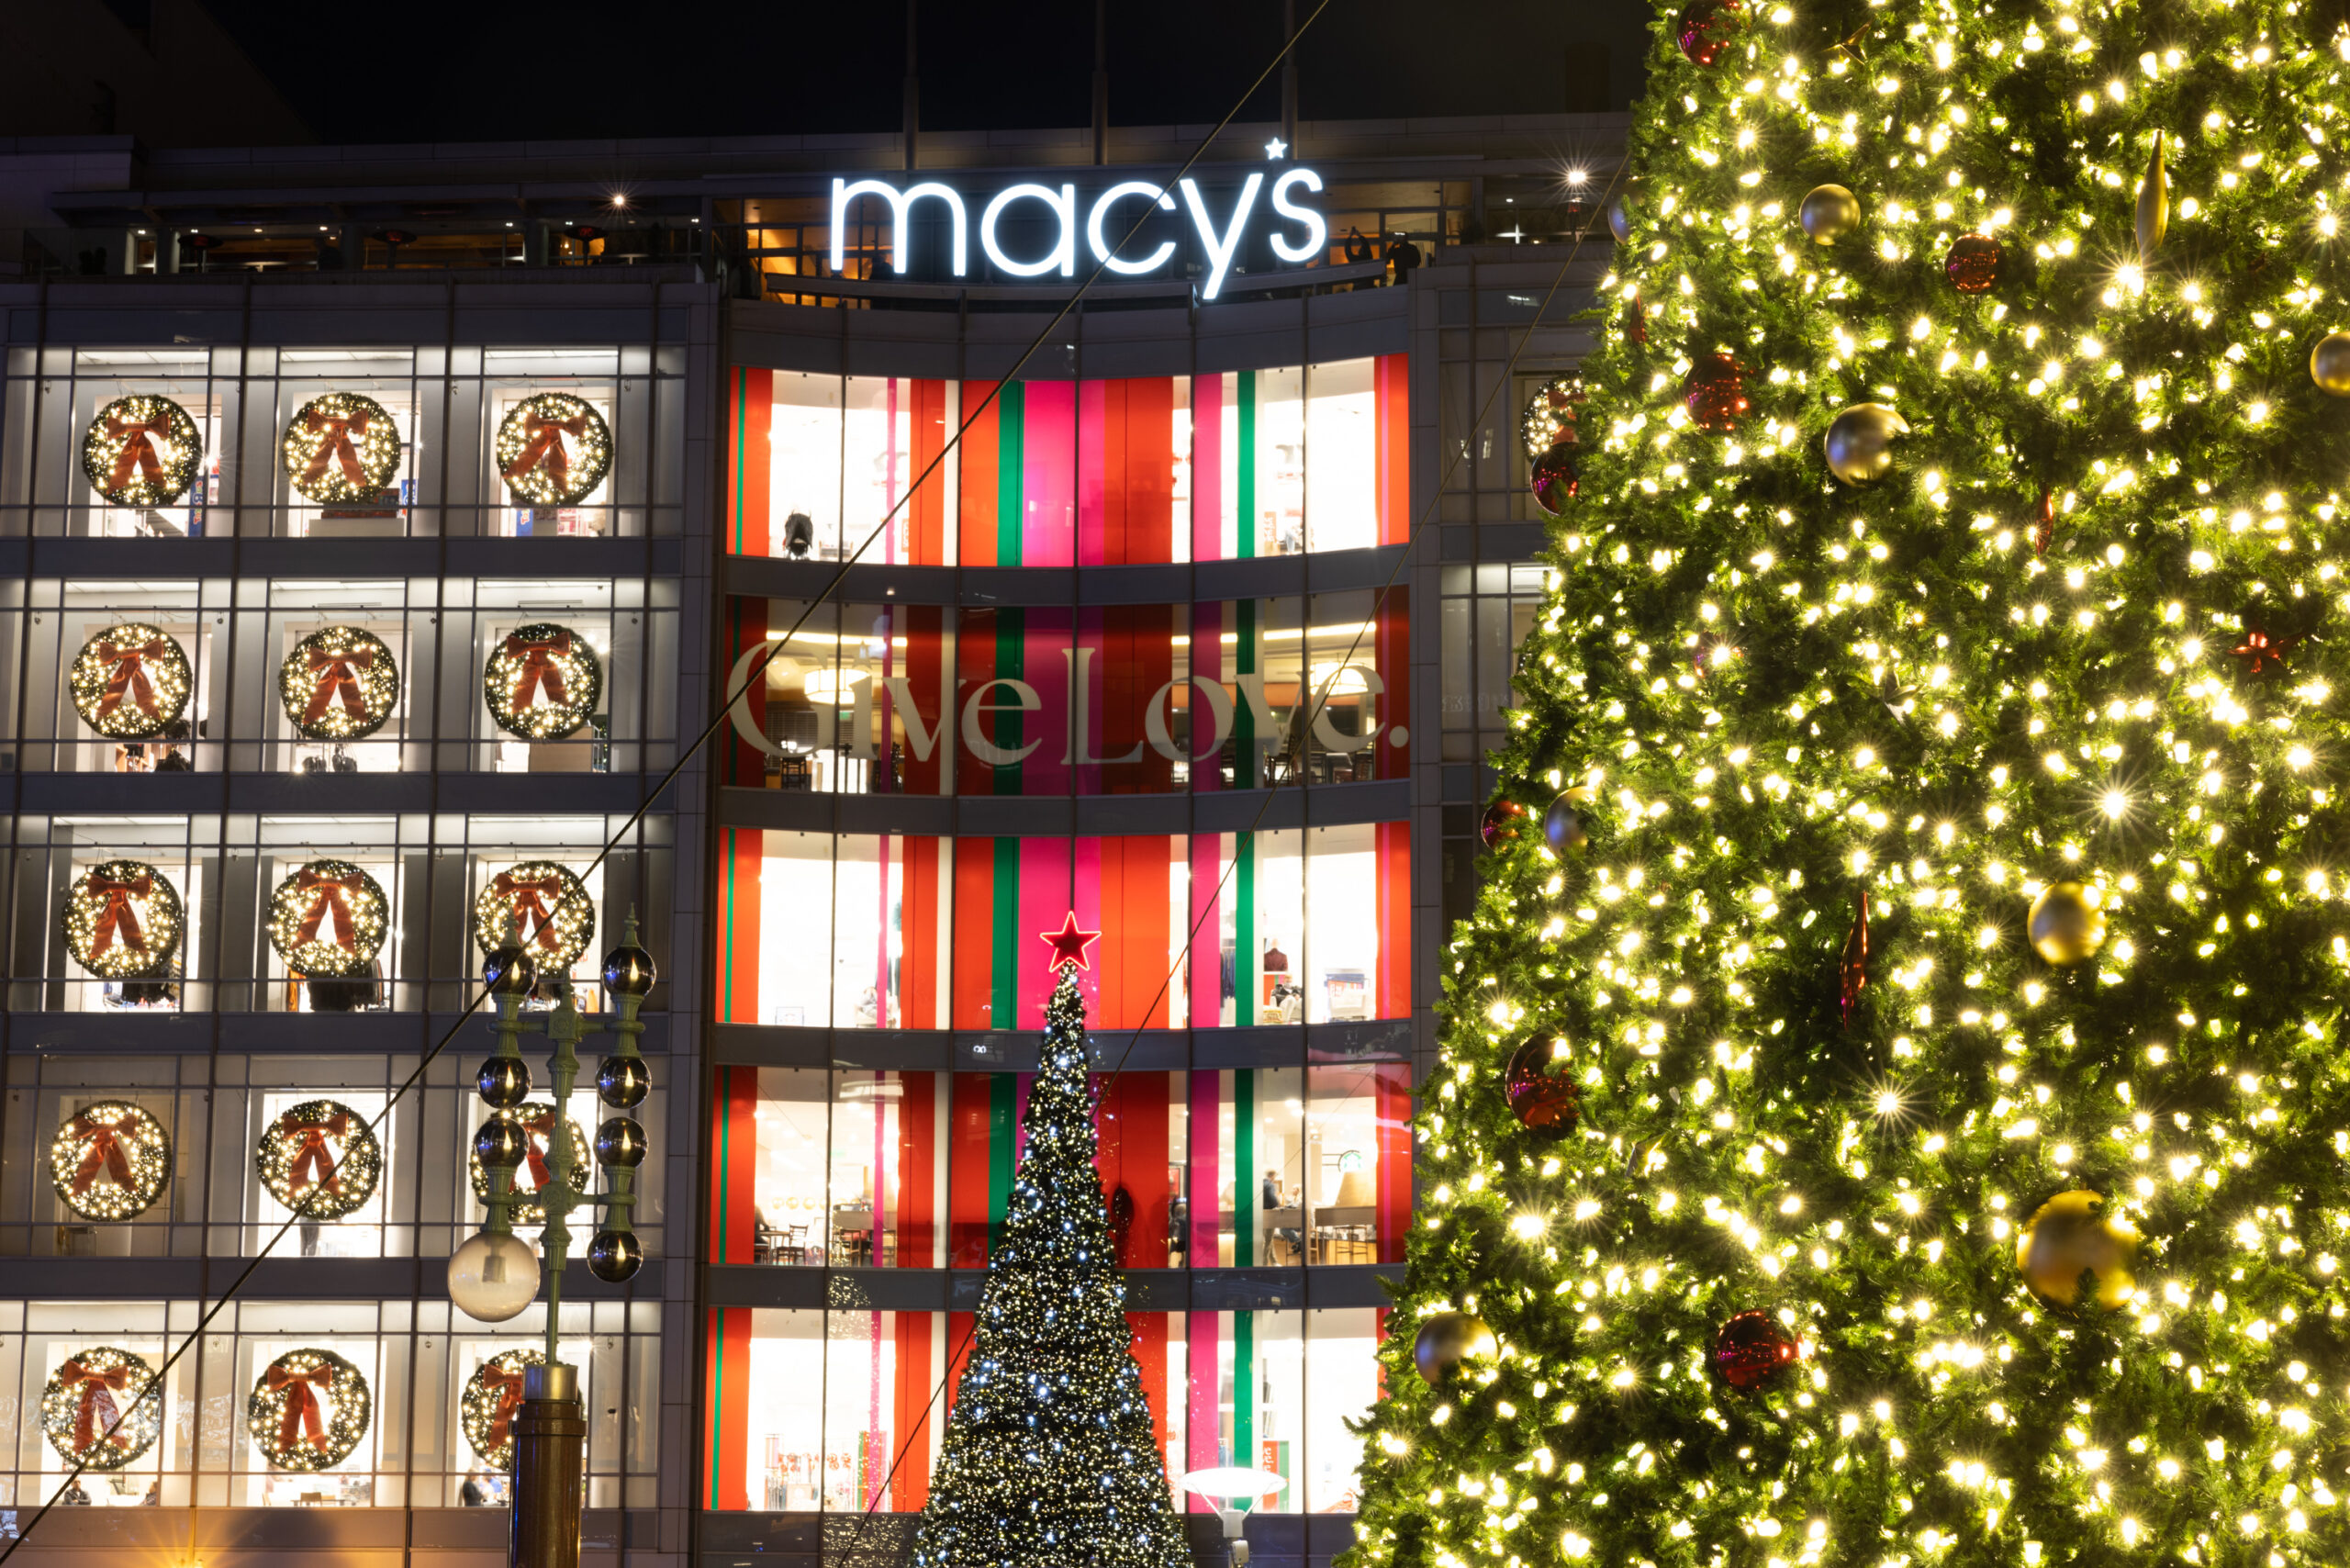 An illuminated Macy’s building stands behind a decorated Christmas tree at night in Union Square in San Francisco, California on Friday, Dec. 9, 2022.